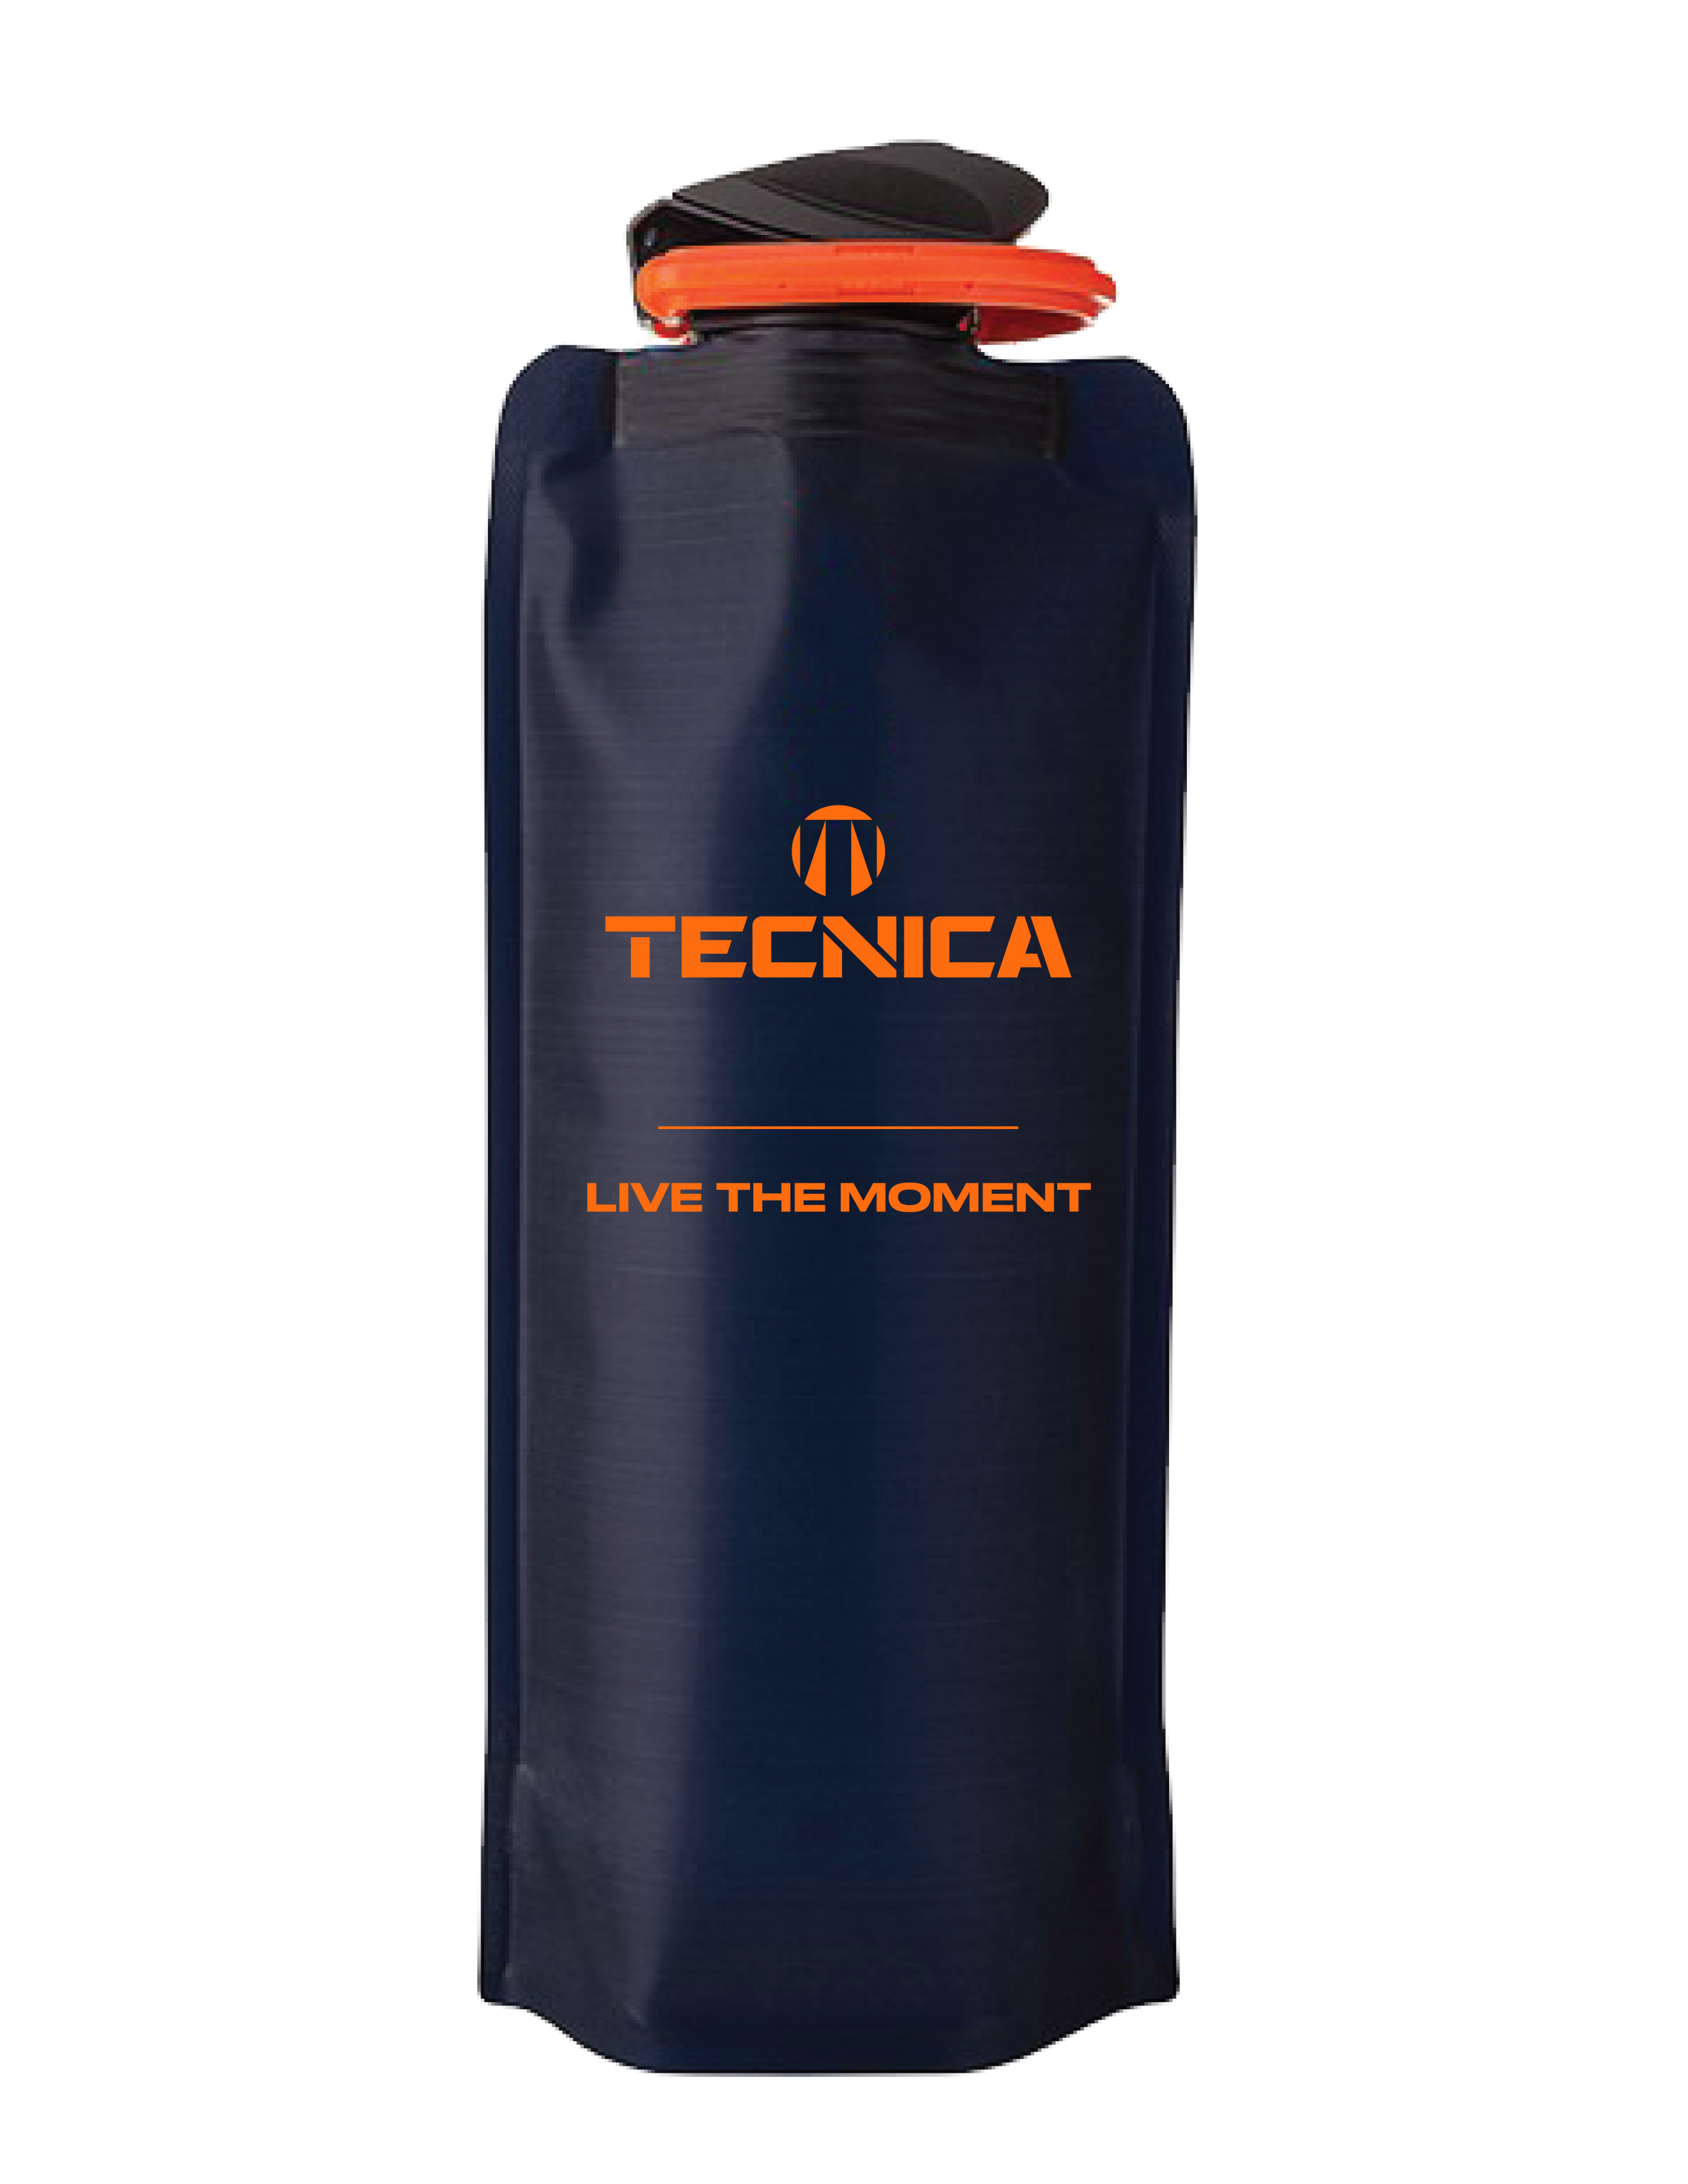 TECNICA 1 LITER COLLAPSIBLE WATER BAG